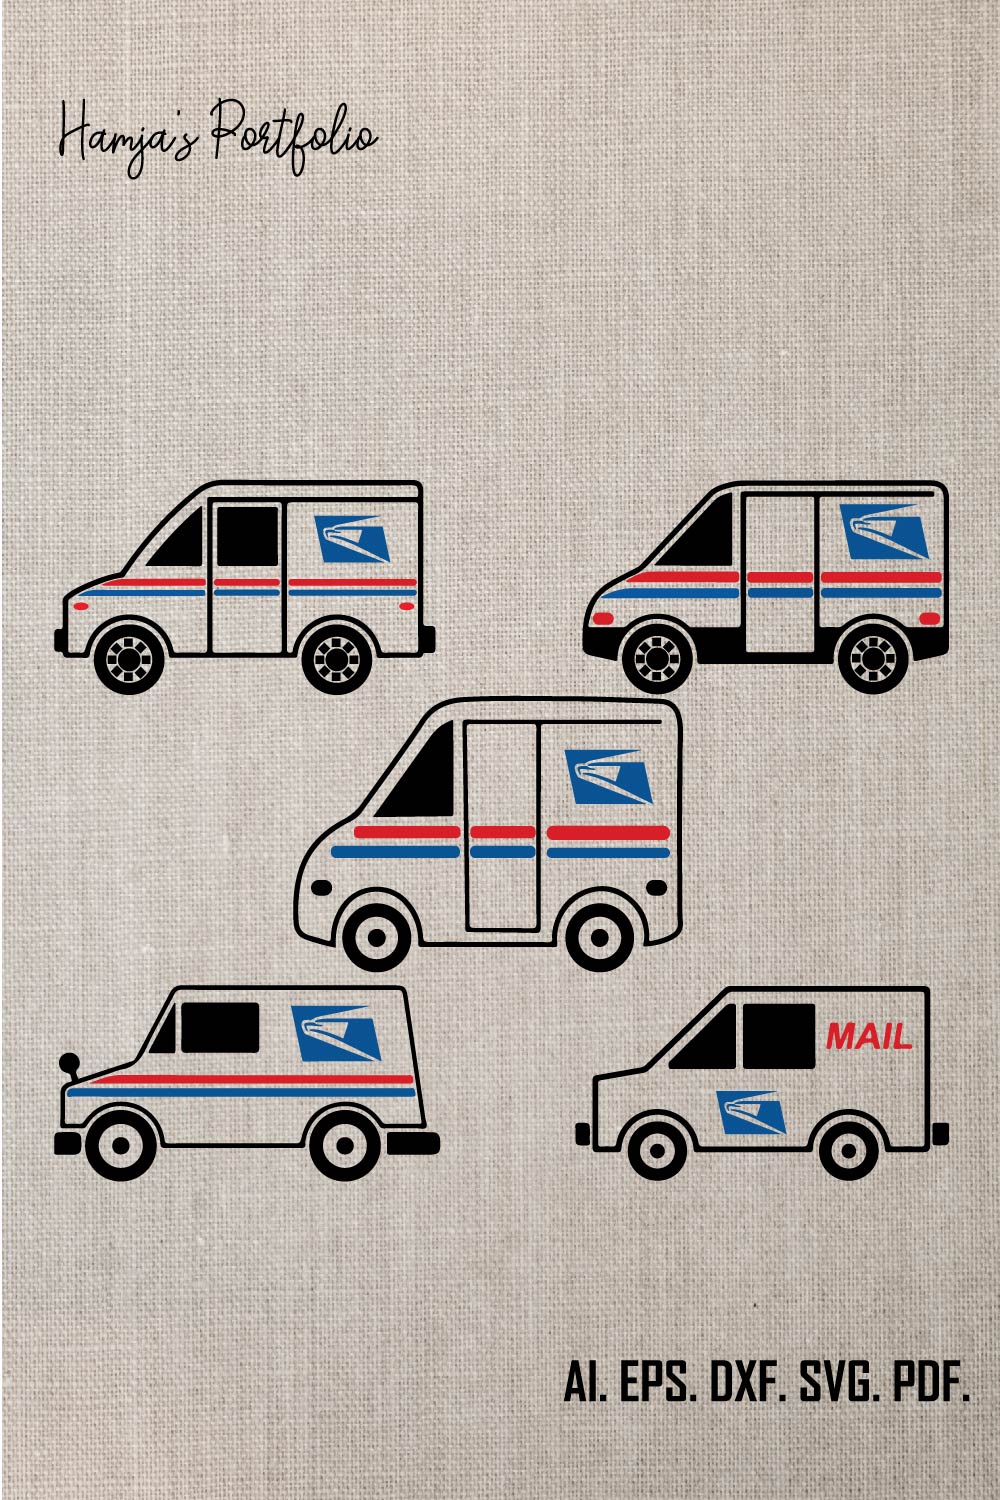 Mail Truck SVG File, Postal Truck SVG, Post Office Clip Art, Delivery Truck svg, Cut files for Cricut, Cameo, Silhouette, Cut File pinterest preview image.